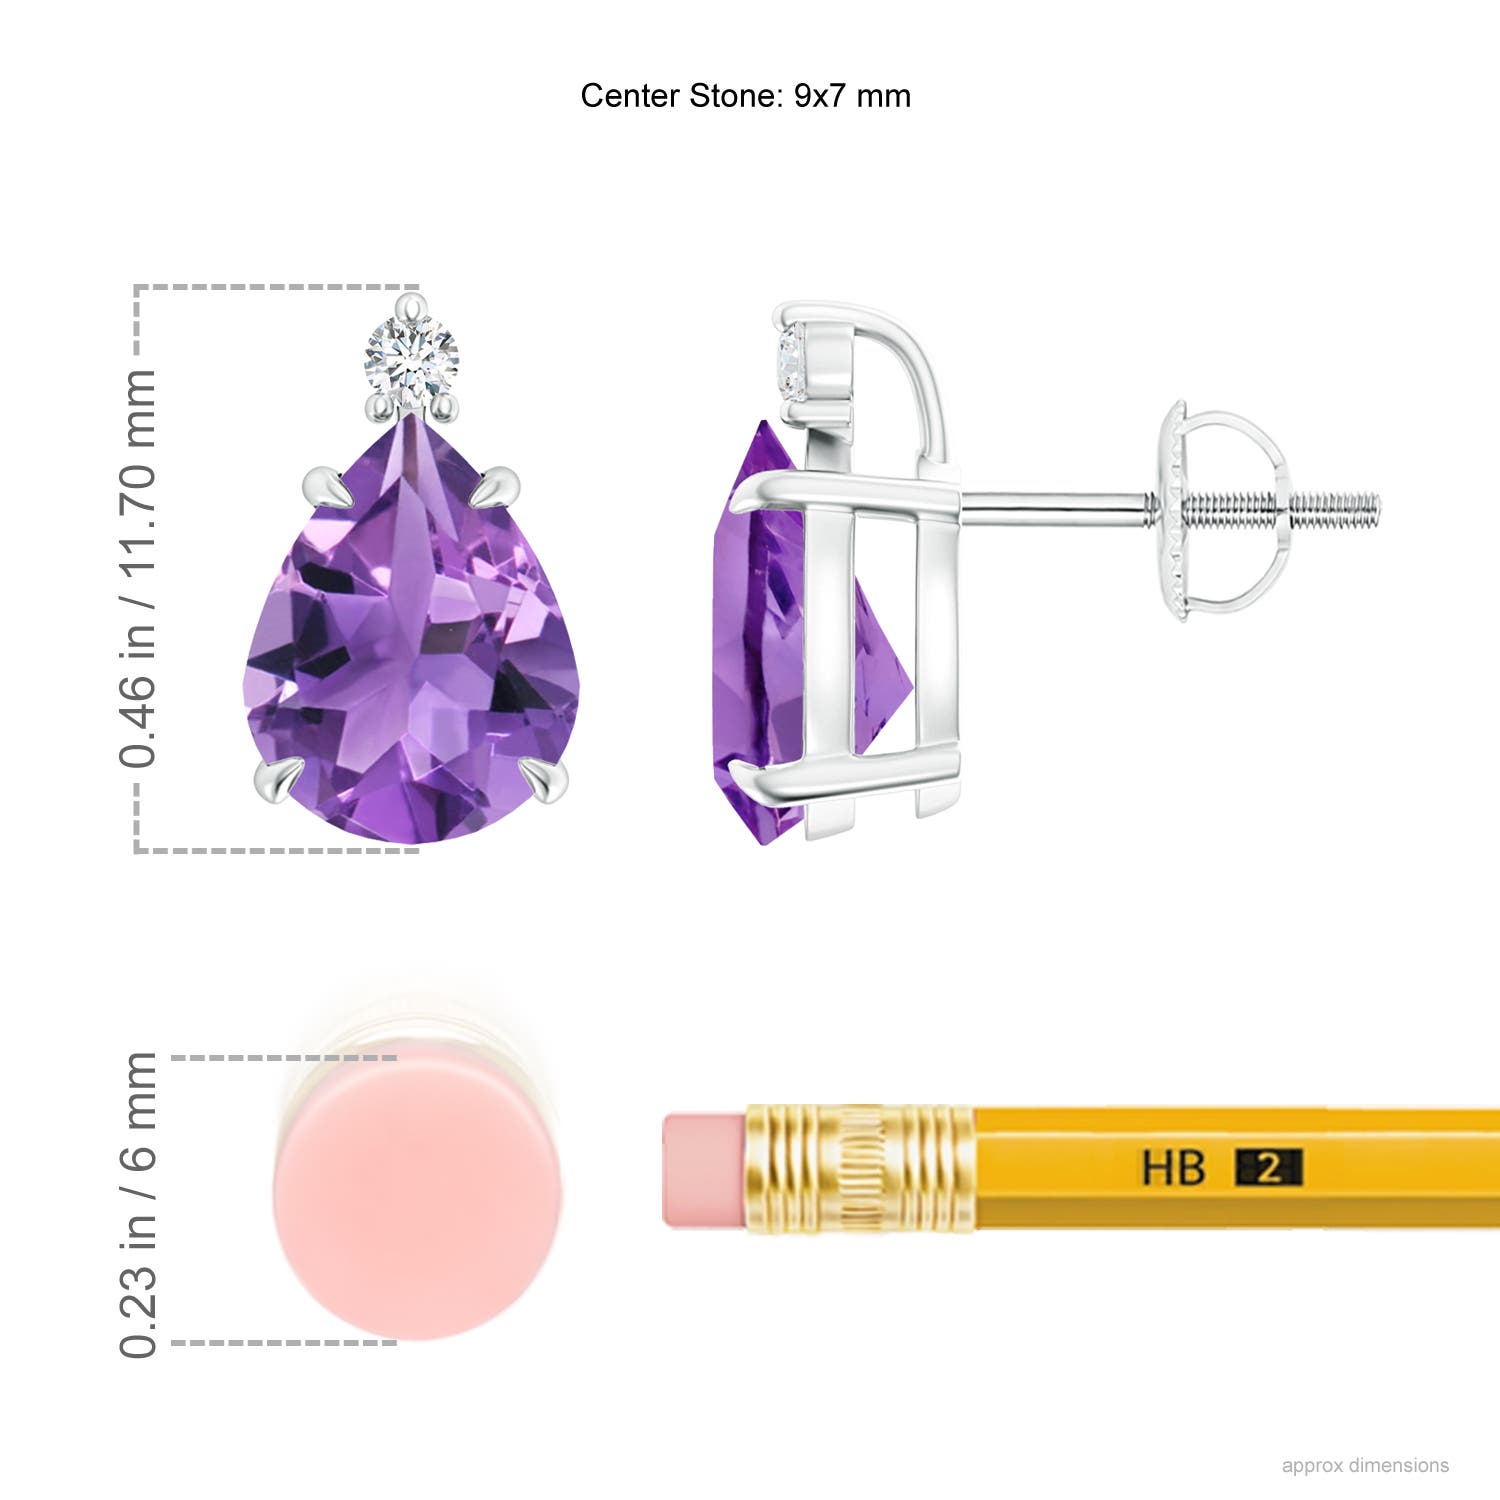 AA - Amethyst / 3.07 CT / 14 KT White Gold